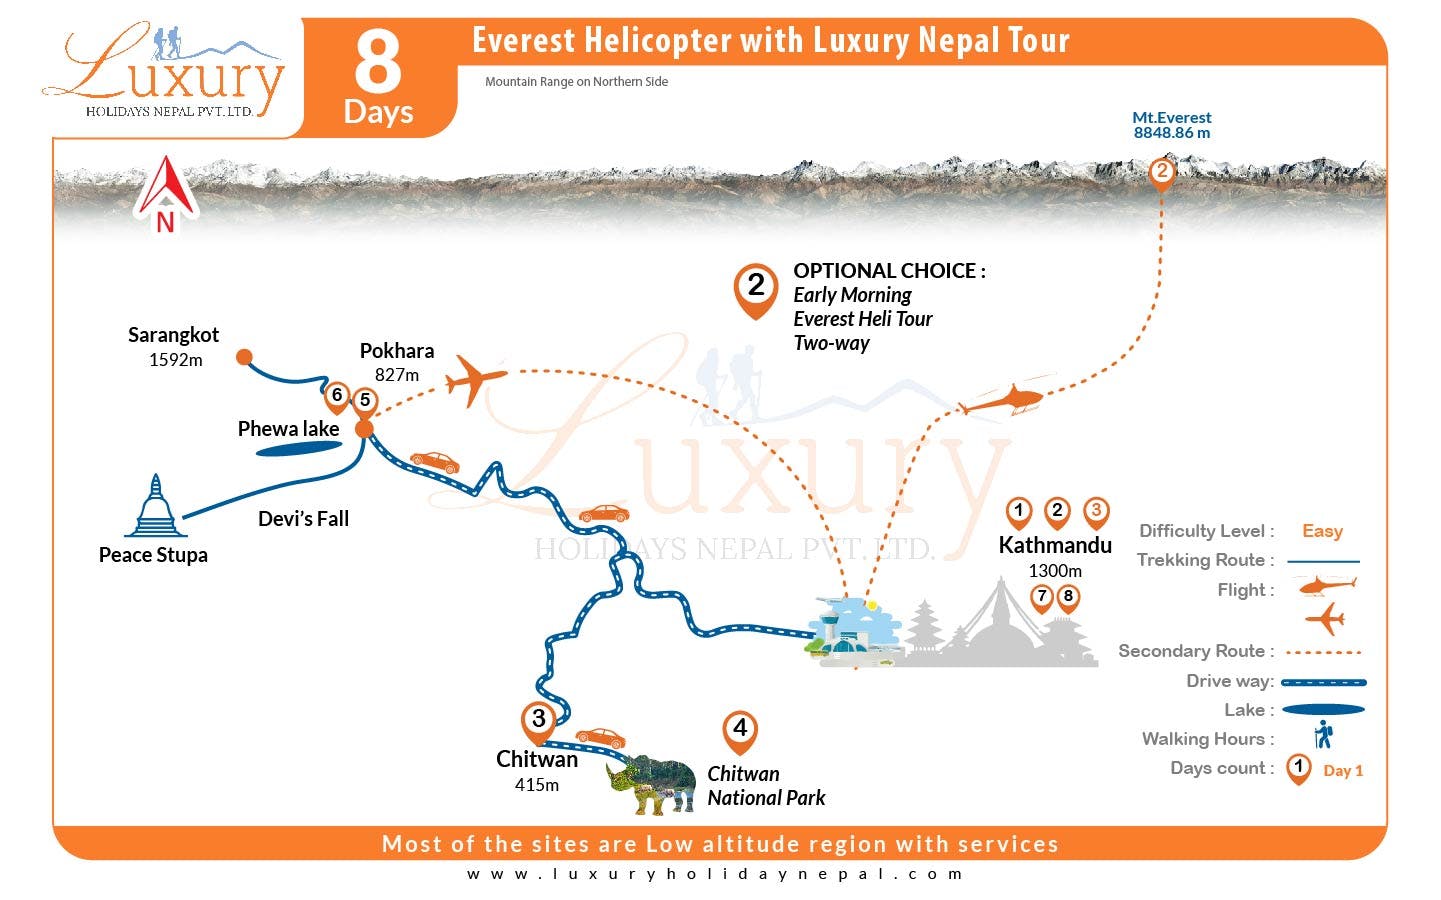 Everest Helicopter with Luxury Nepal TourMap